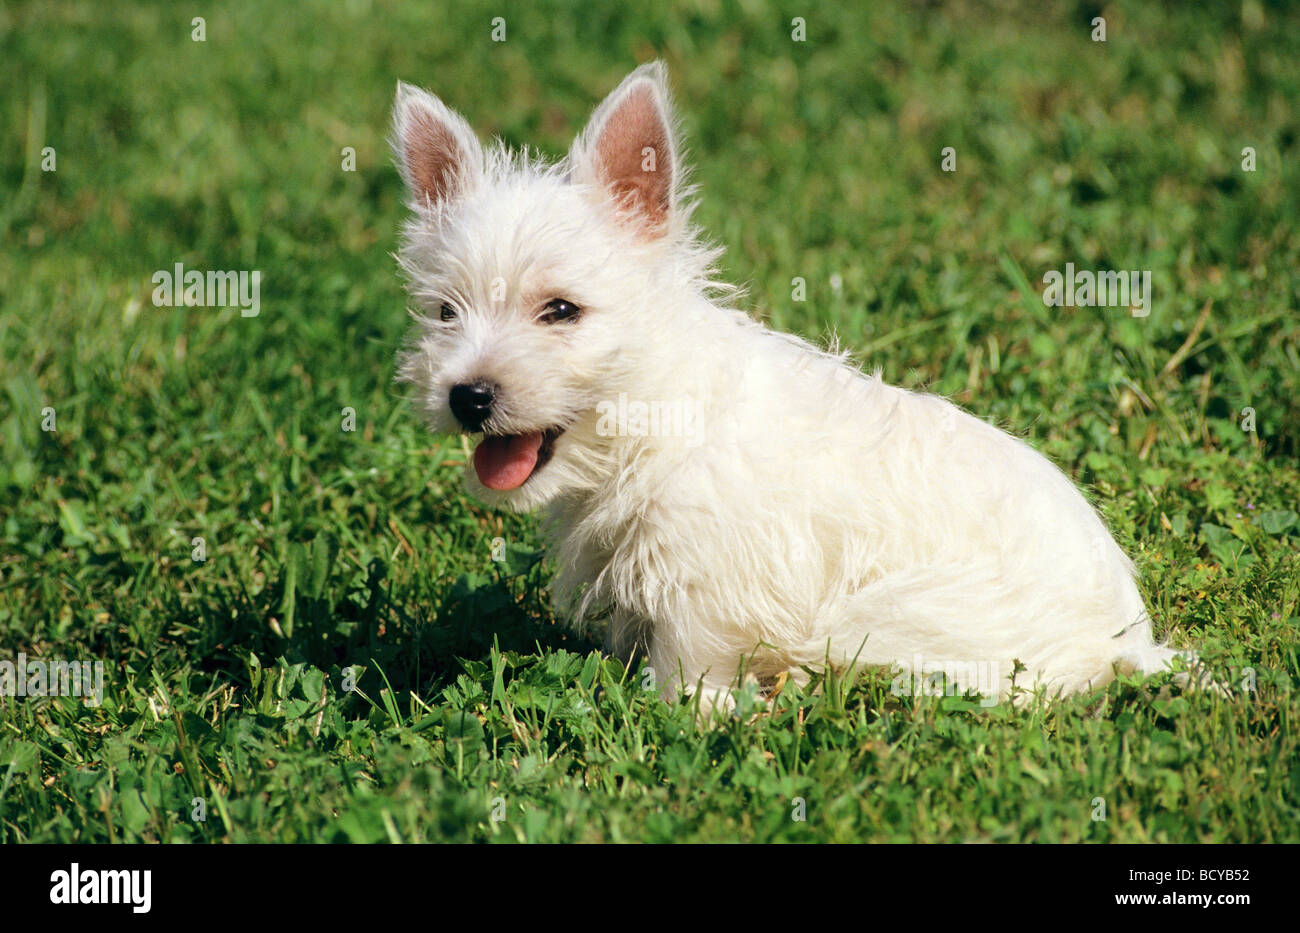 West Highland WhiteTerrier - puppy sitting on meadow Banque D'Images